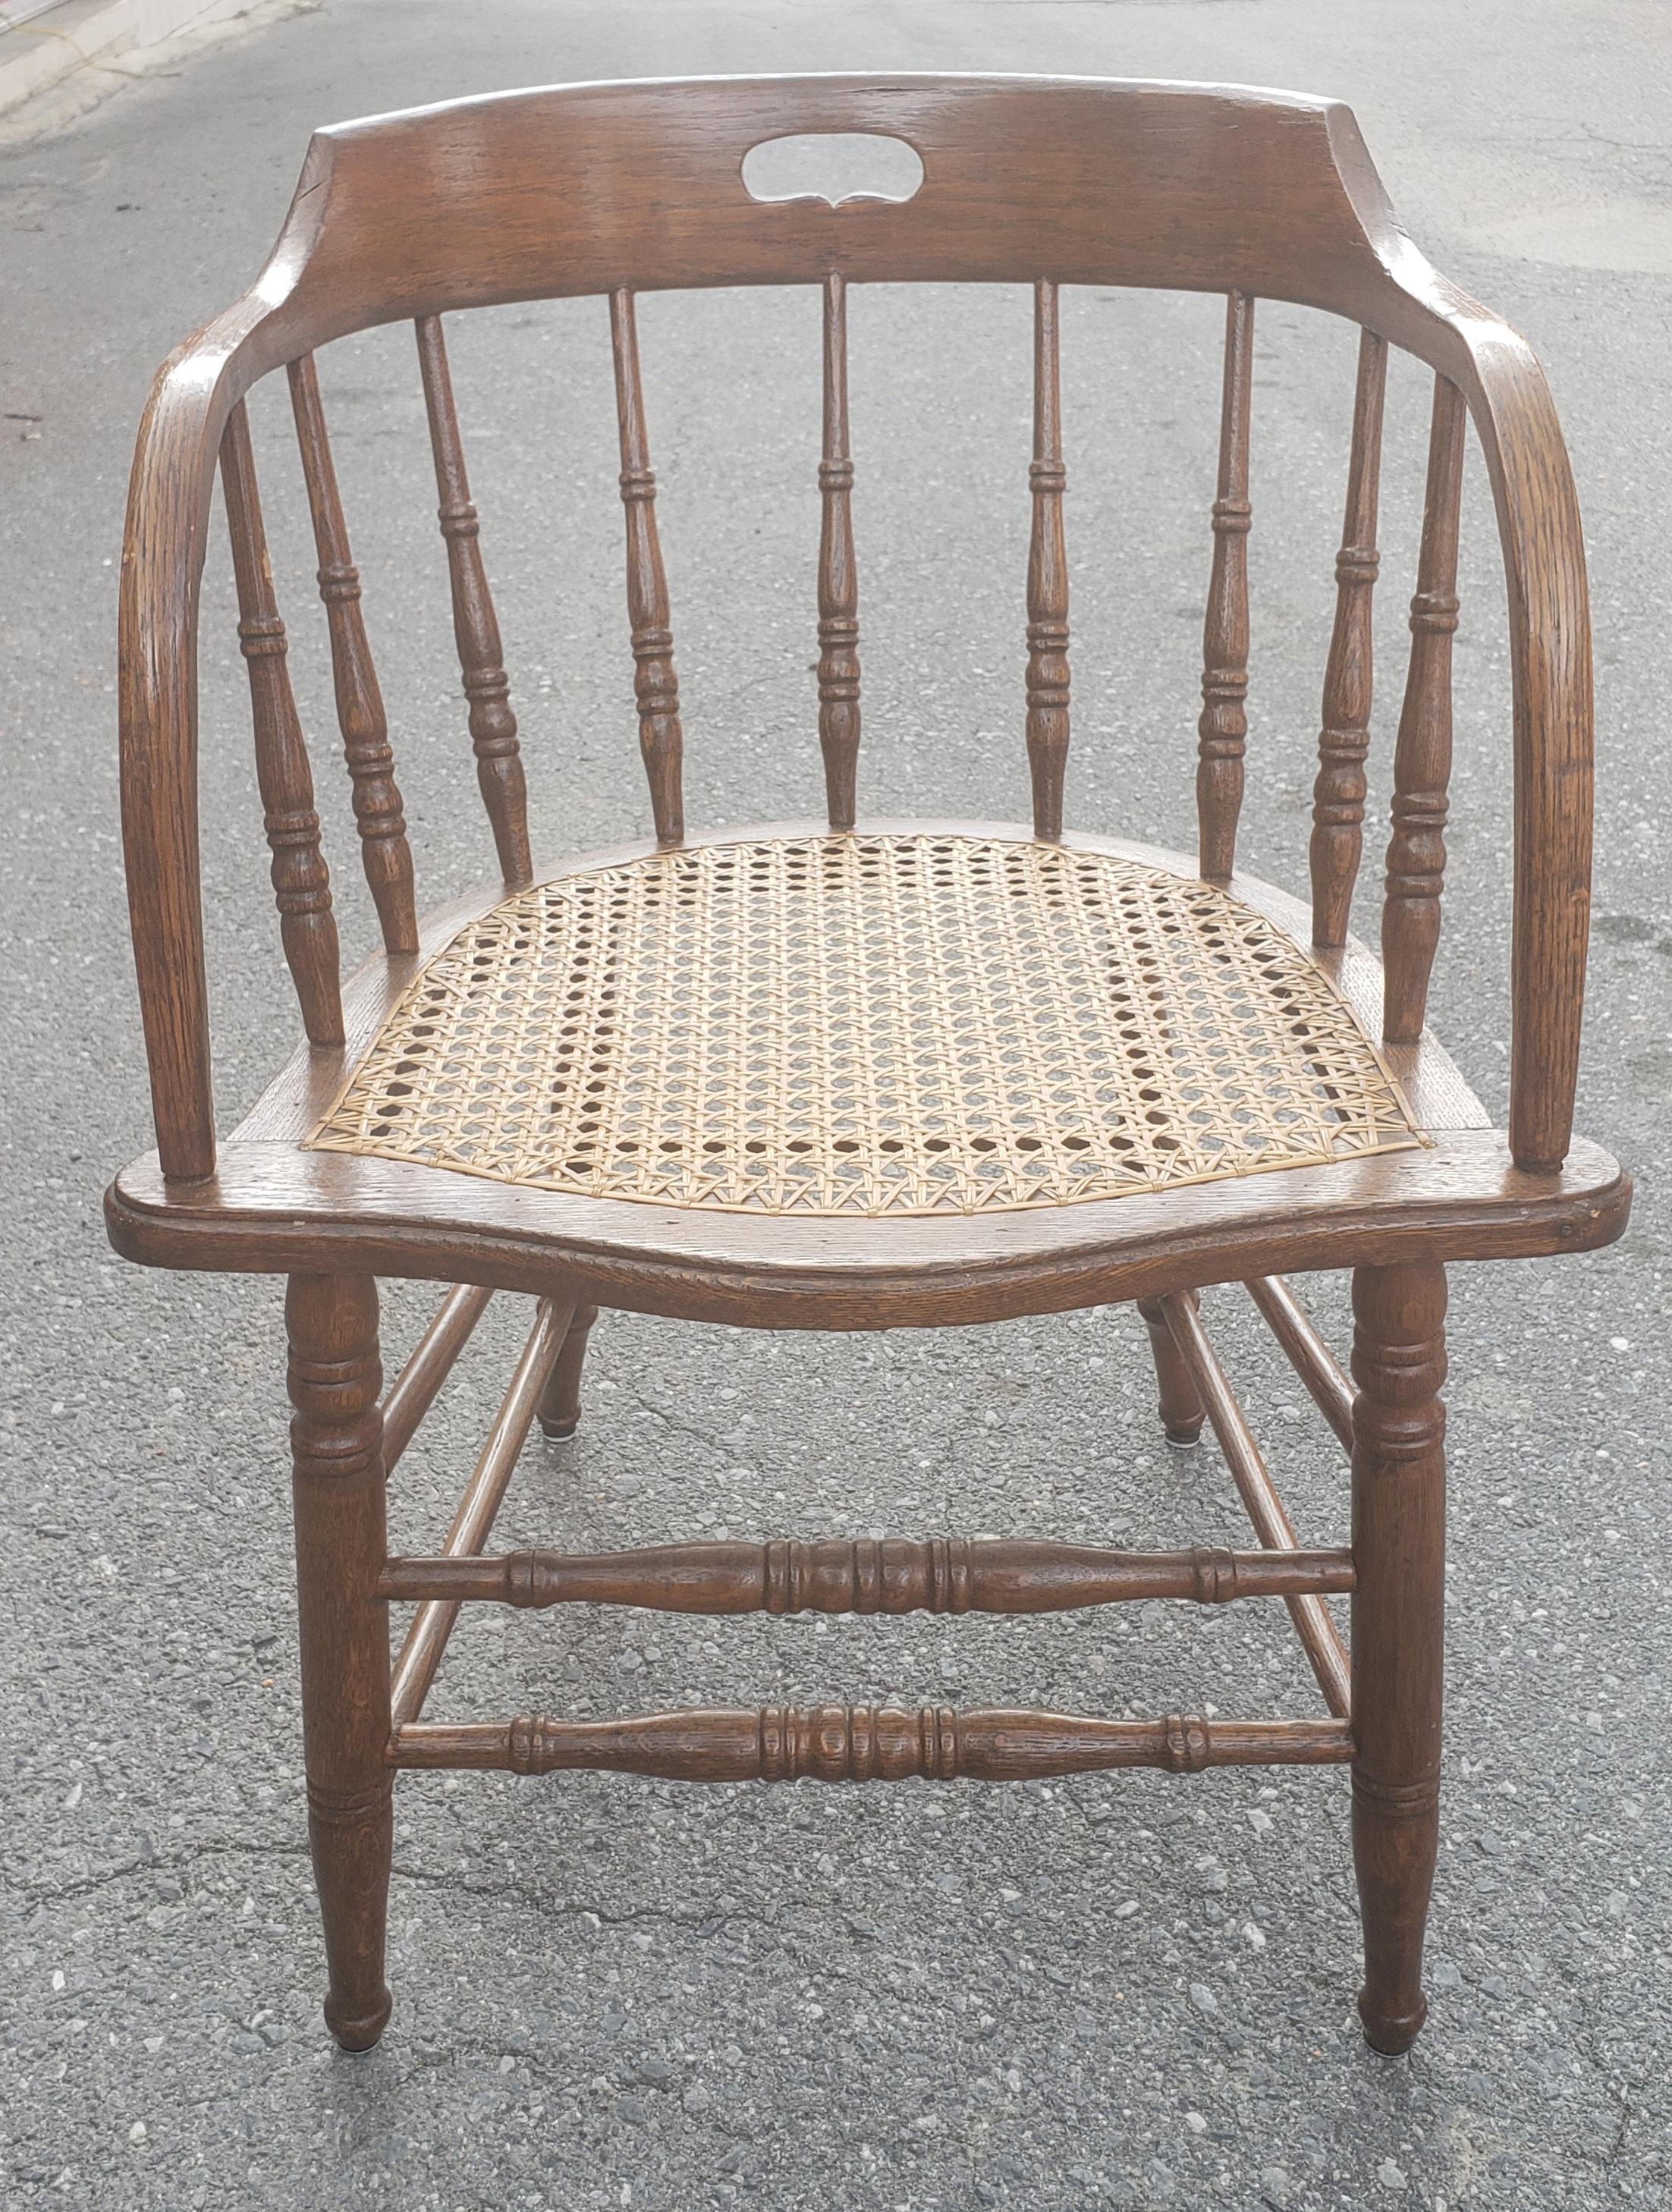 Antique Barrel Back Firehouse Windsor Chair with Cane Seat 4